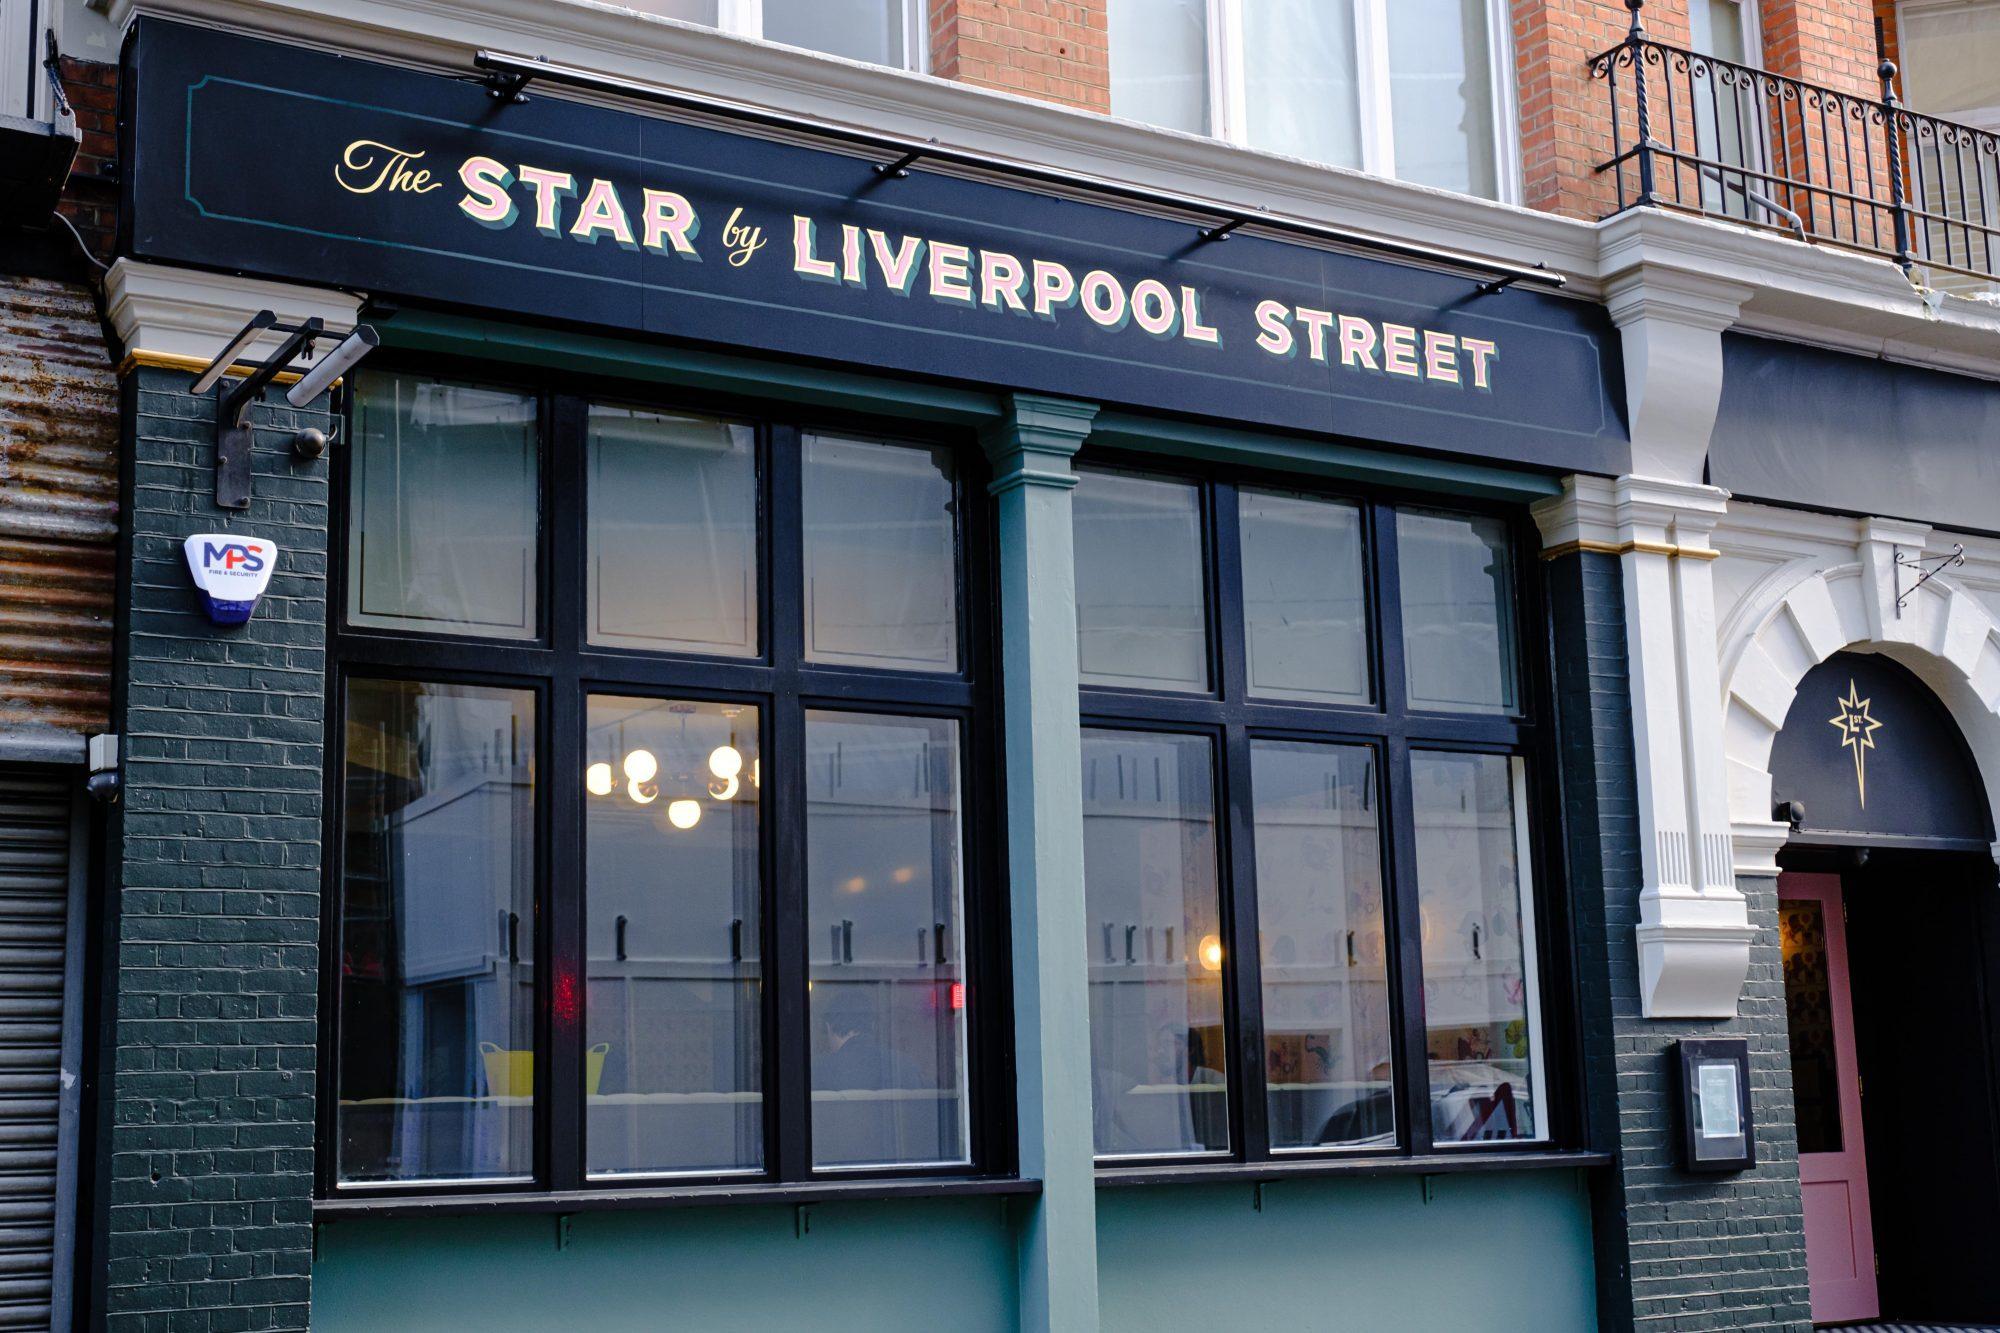 Star By Liverpool Street, The Backstage Room photo #2